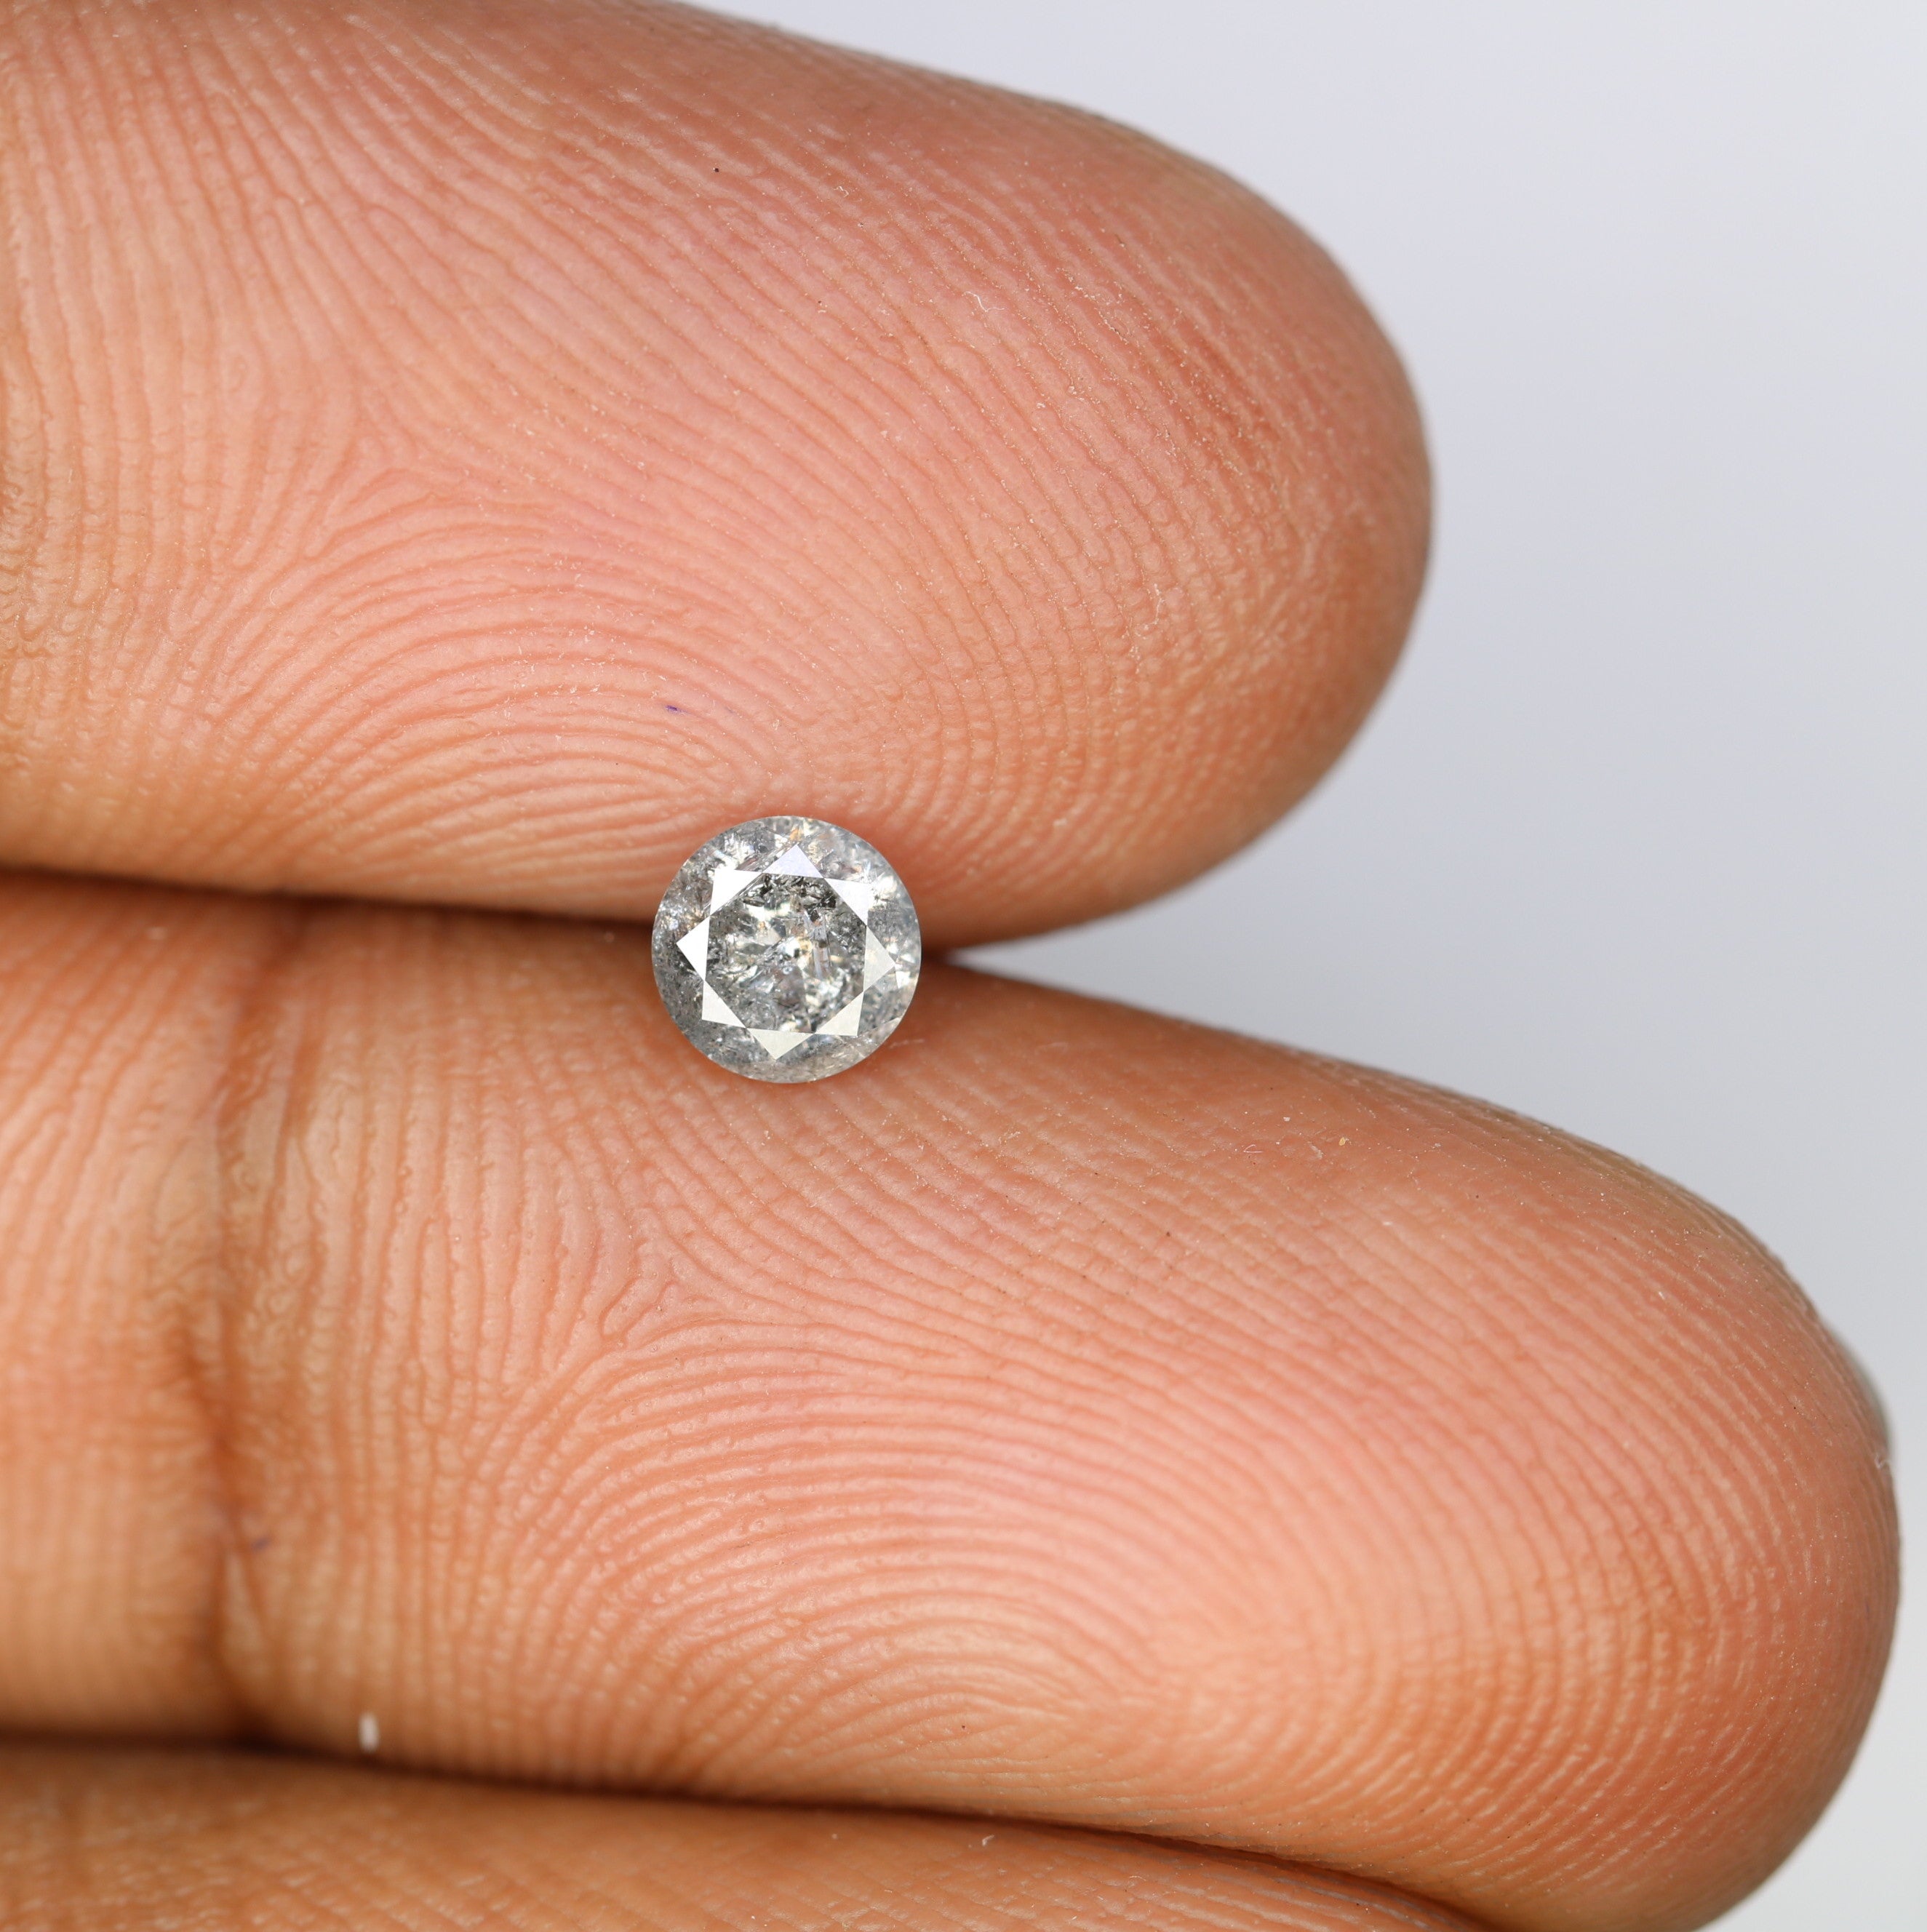 0.40 CT 4.70 x 2.70 MM Salt And Pepper Natural Round Brilliant Cut Diamond For Engagement Ring